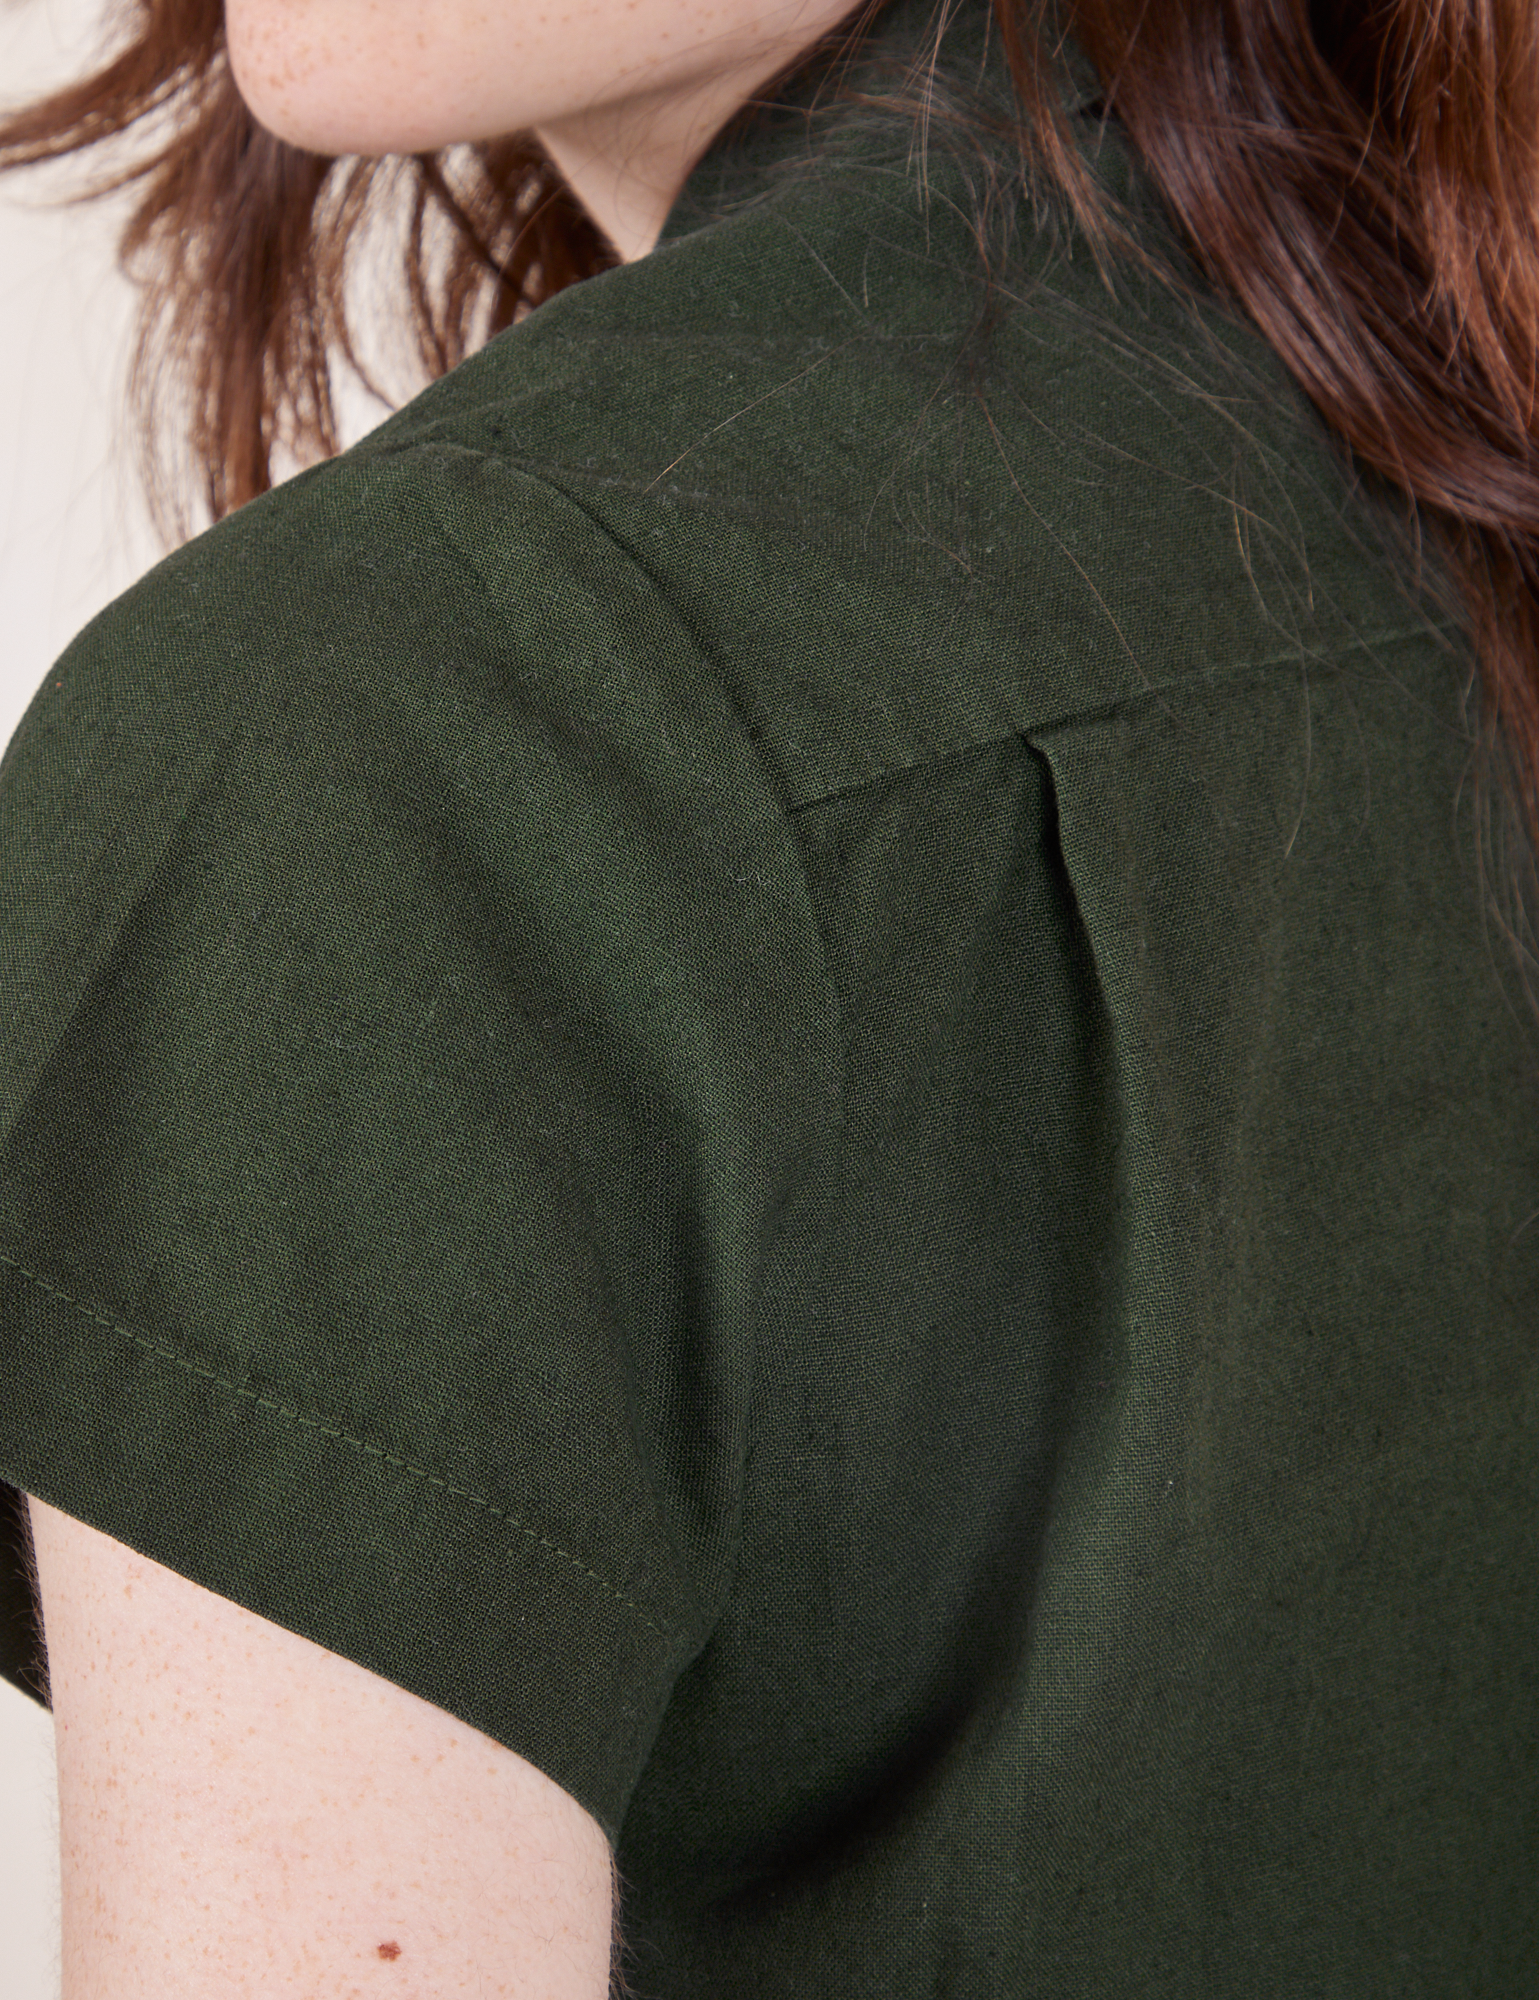 Pantry Button-Up in Swamp Green back shoulder close up on Hana